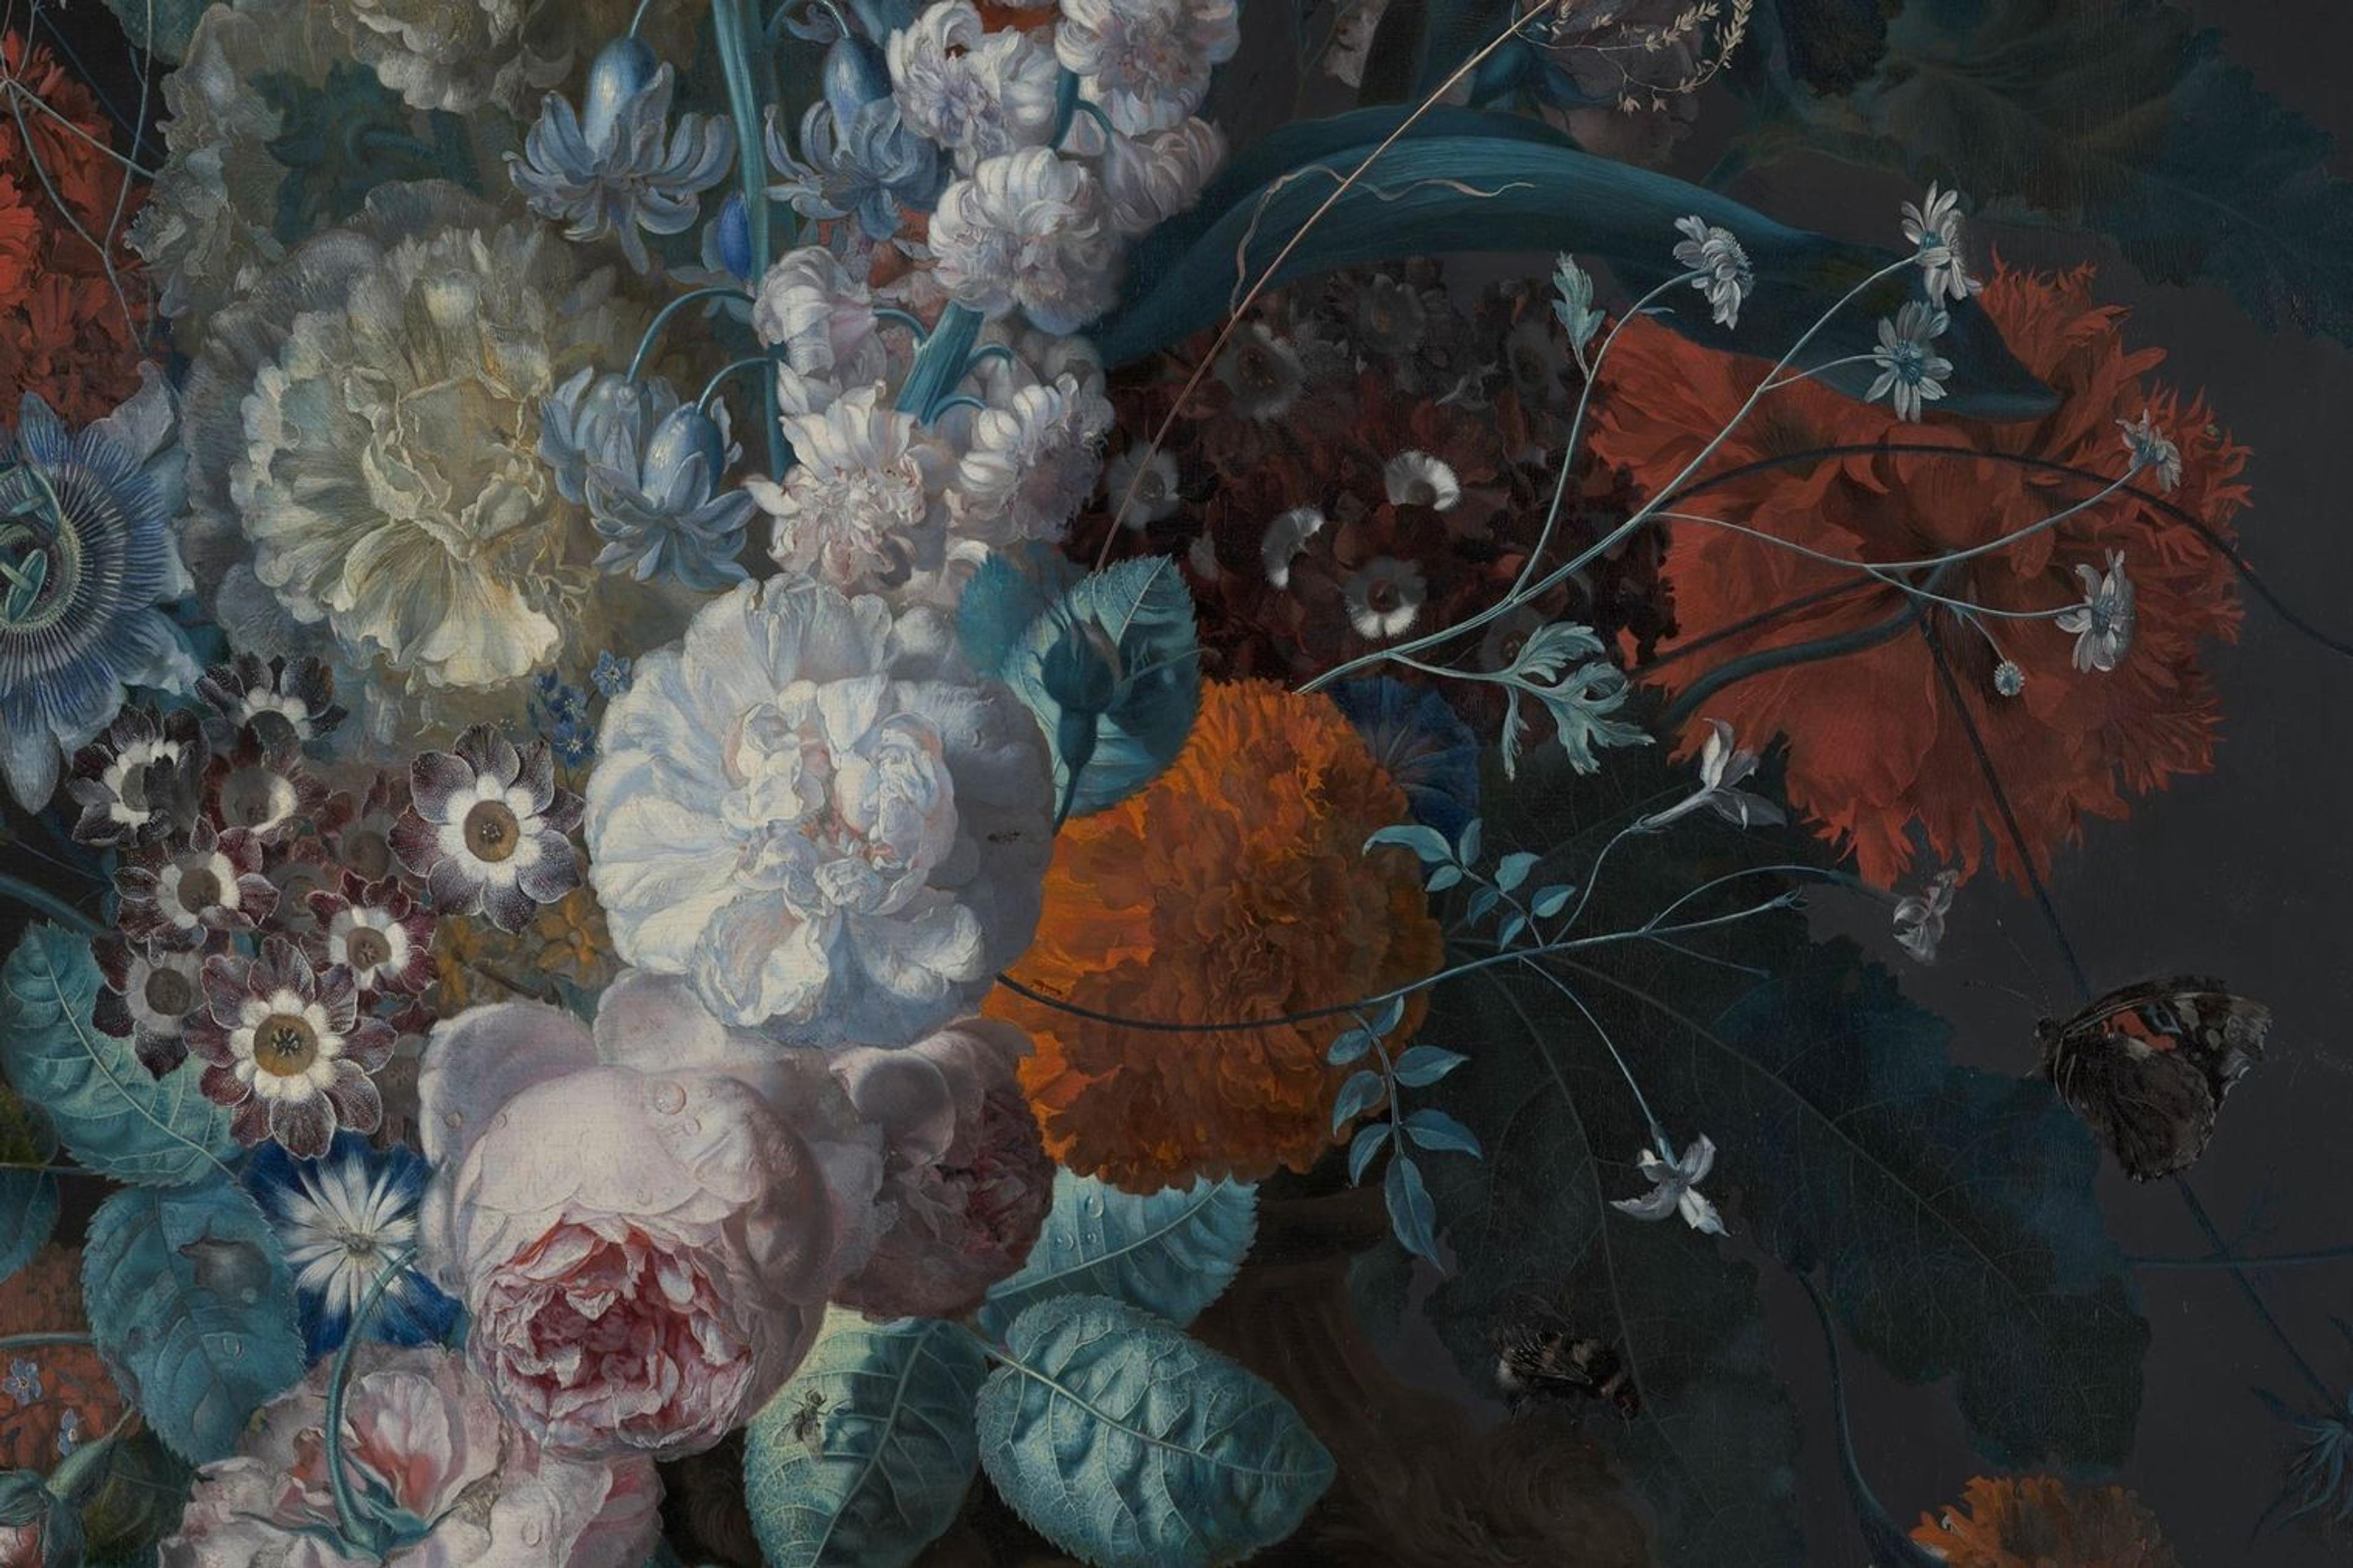 Detail view of flowers and a butterfly in Margareta Haverman's "A Vase of Flowers"